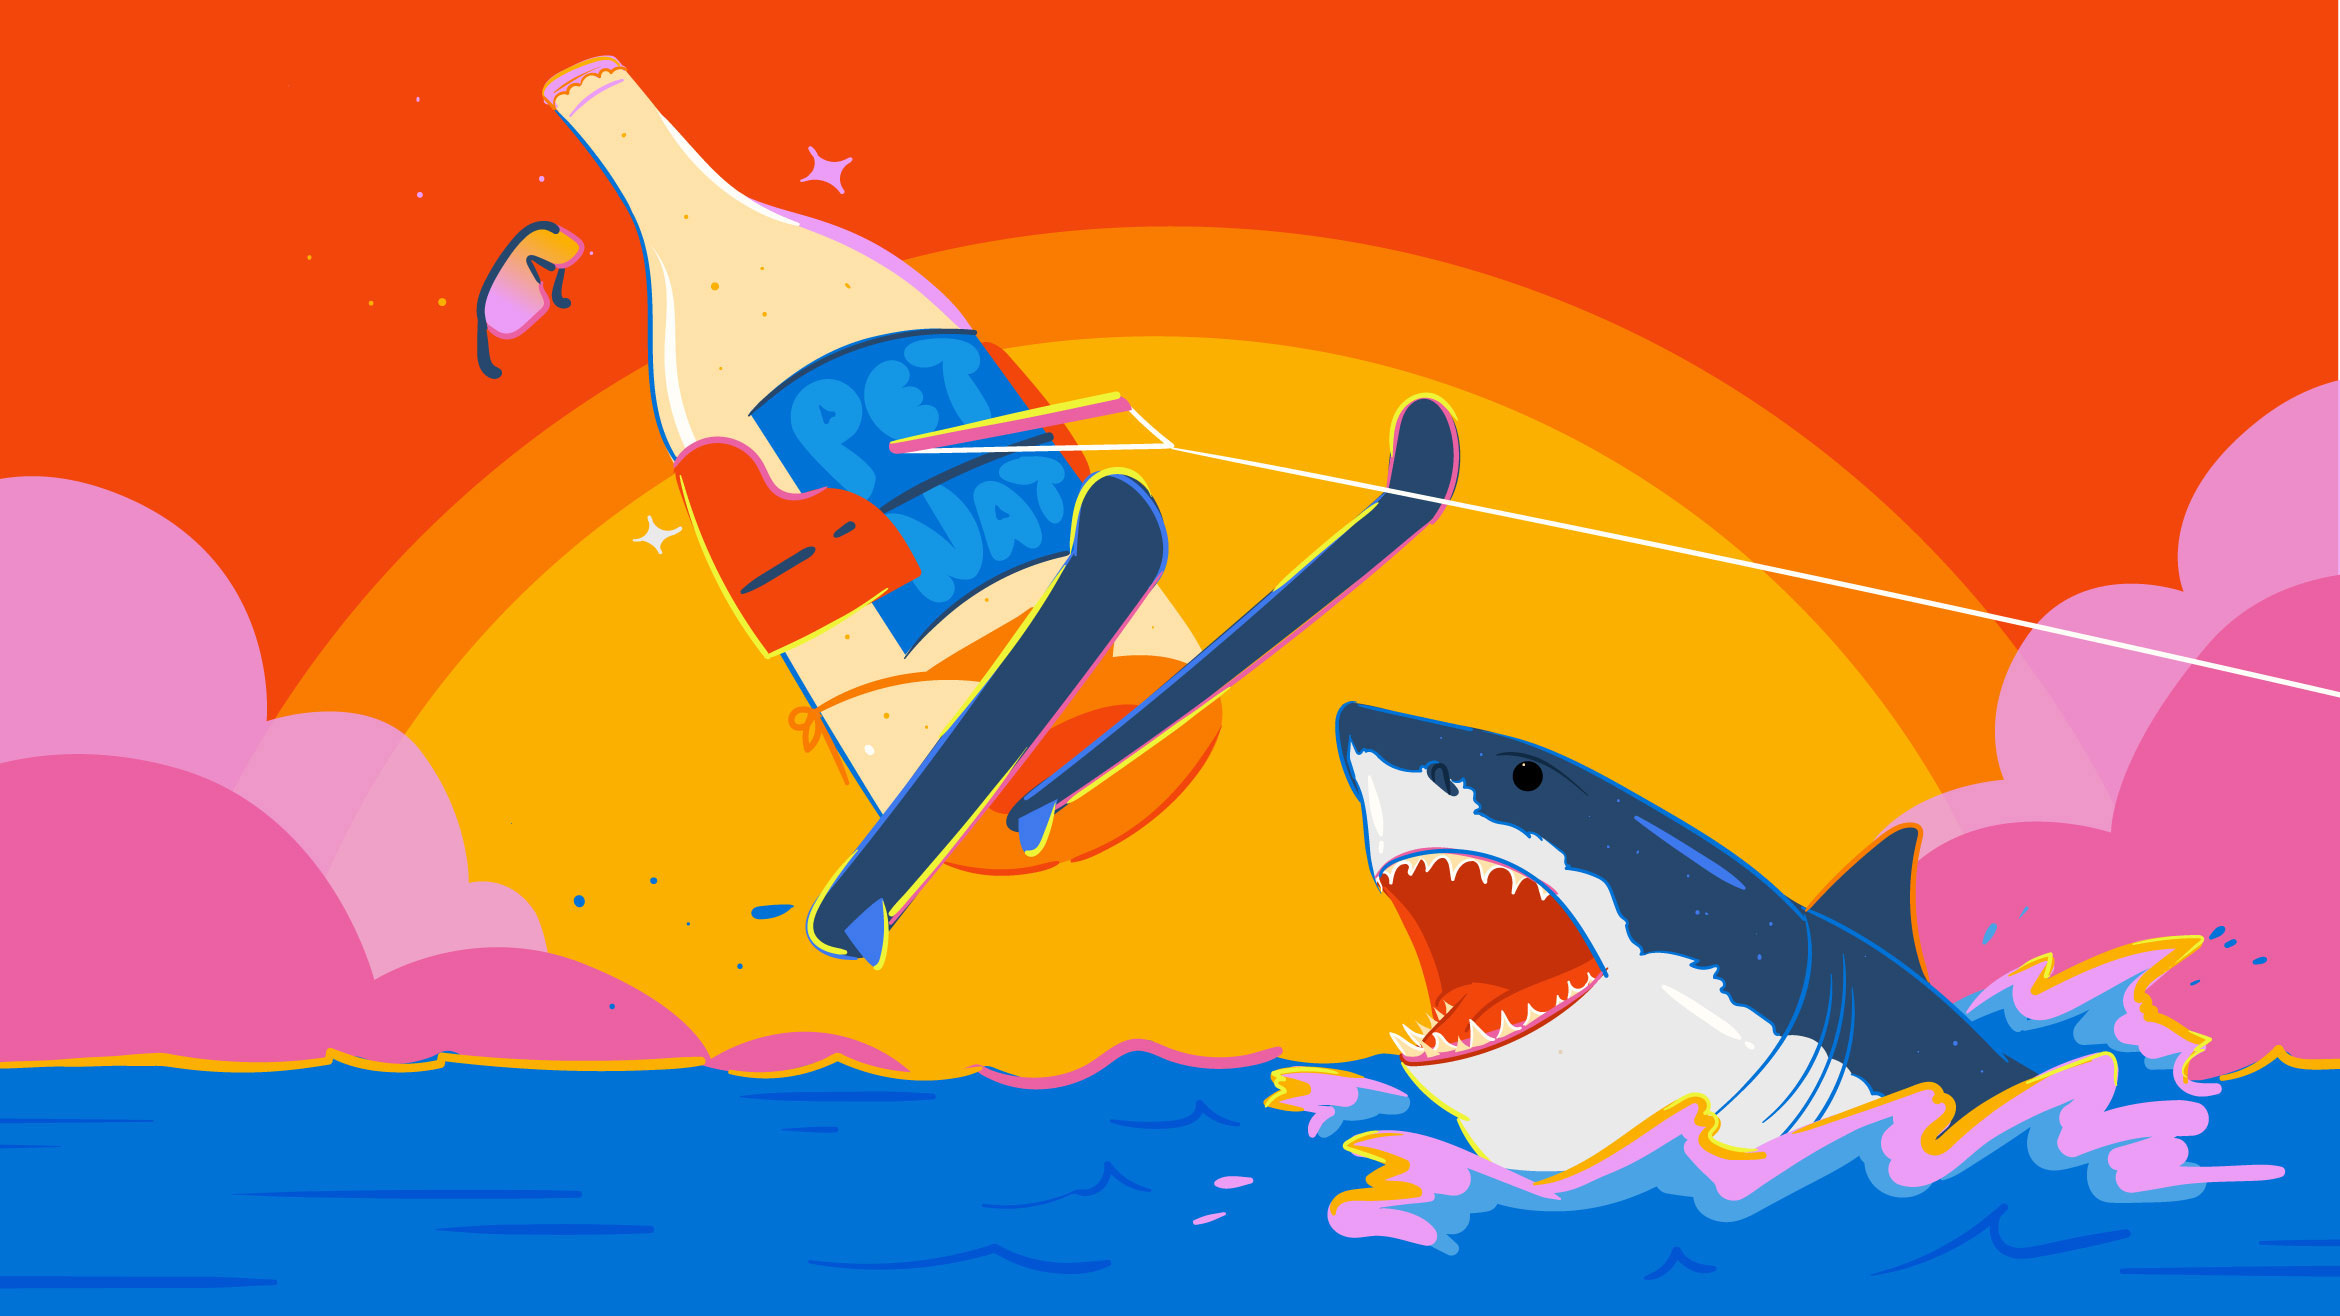 An illustrated depiction of a bottle of pet-nat on water skis jumping over a shark